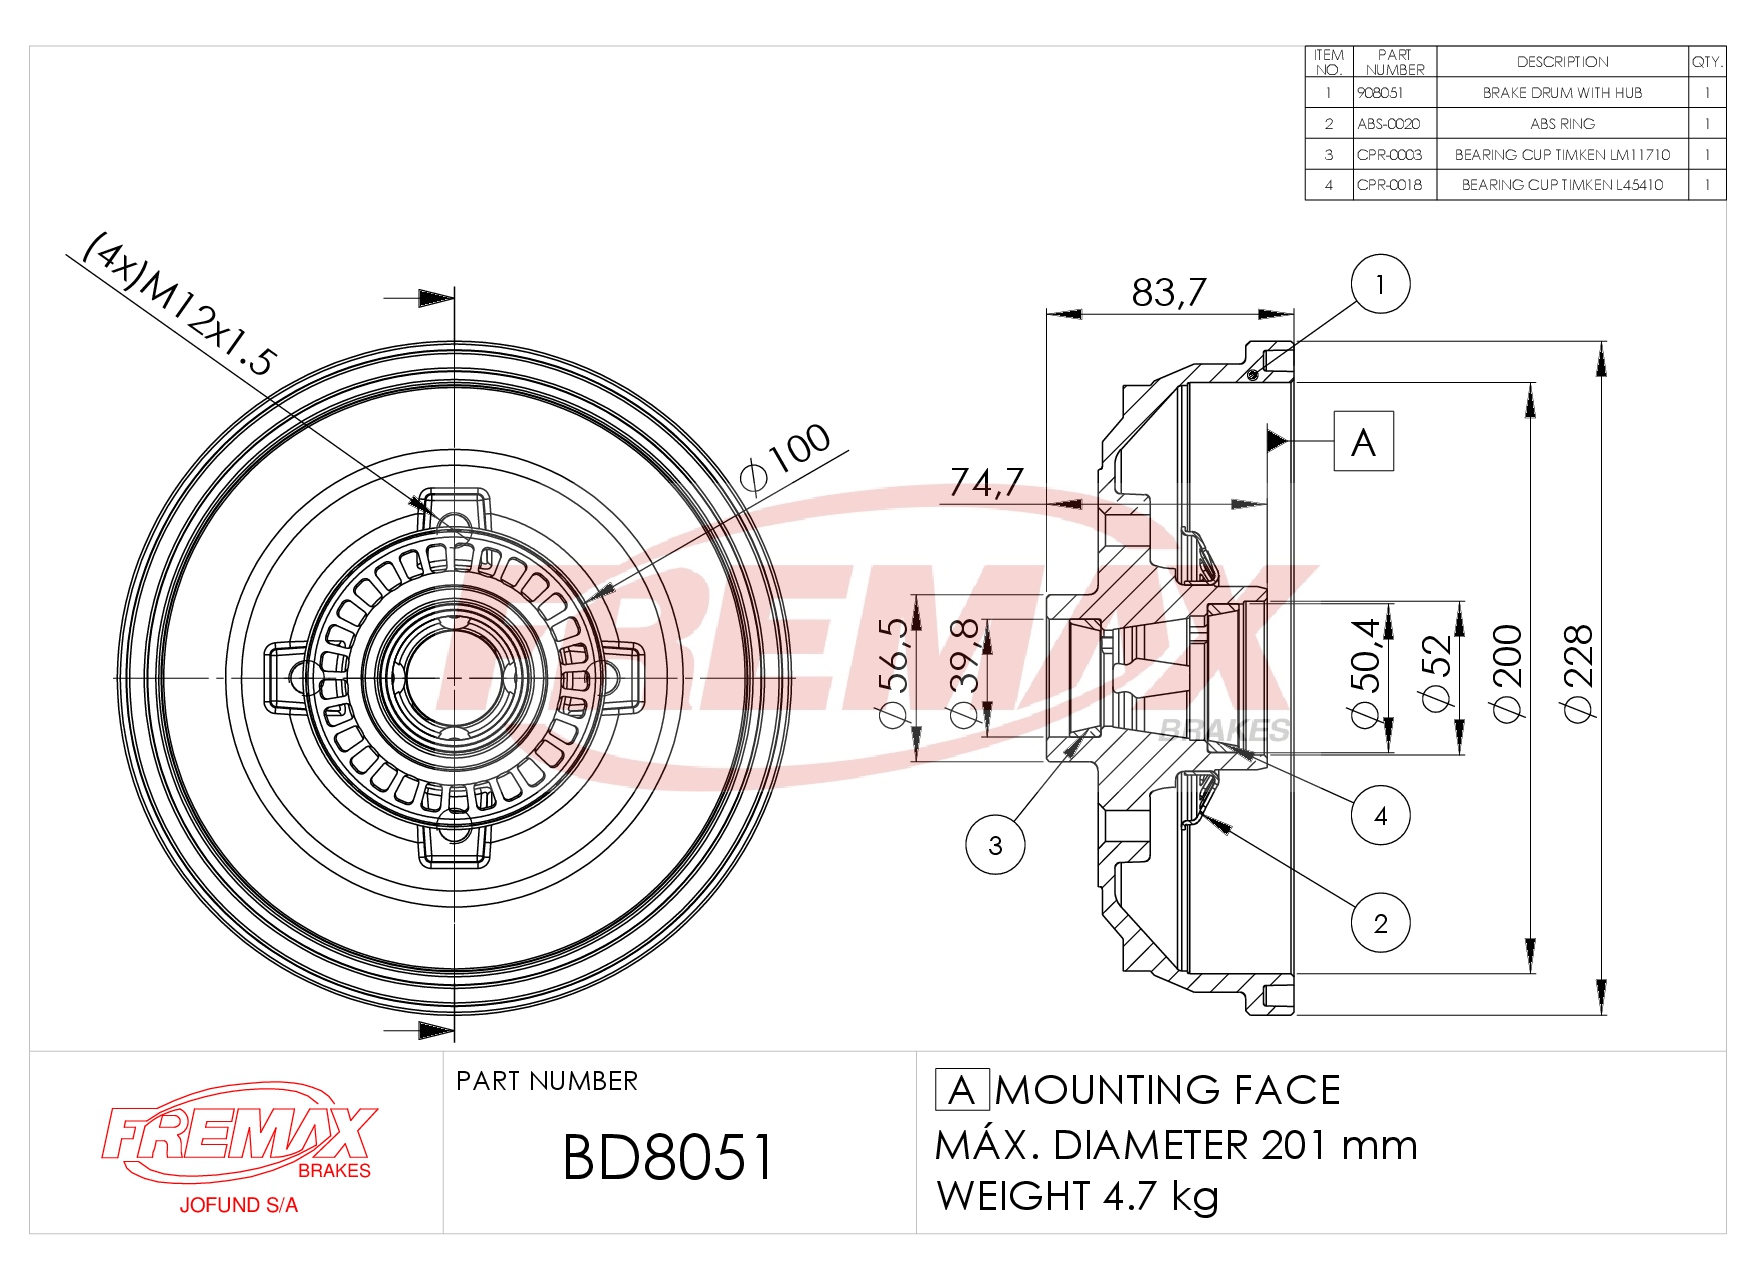 Image de BD-8051  B.DRUM HC  - COMPONENTS ABS RING (1),BEARING CUP  (2) für Opel Corsa B Abs 93-